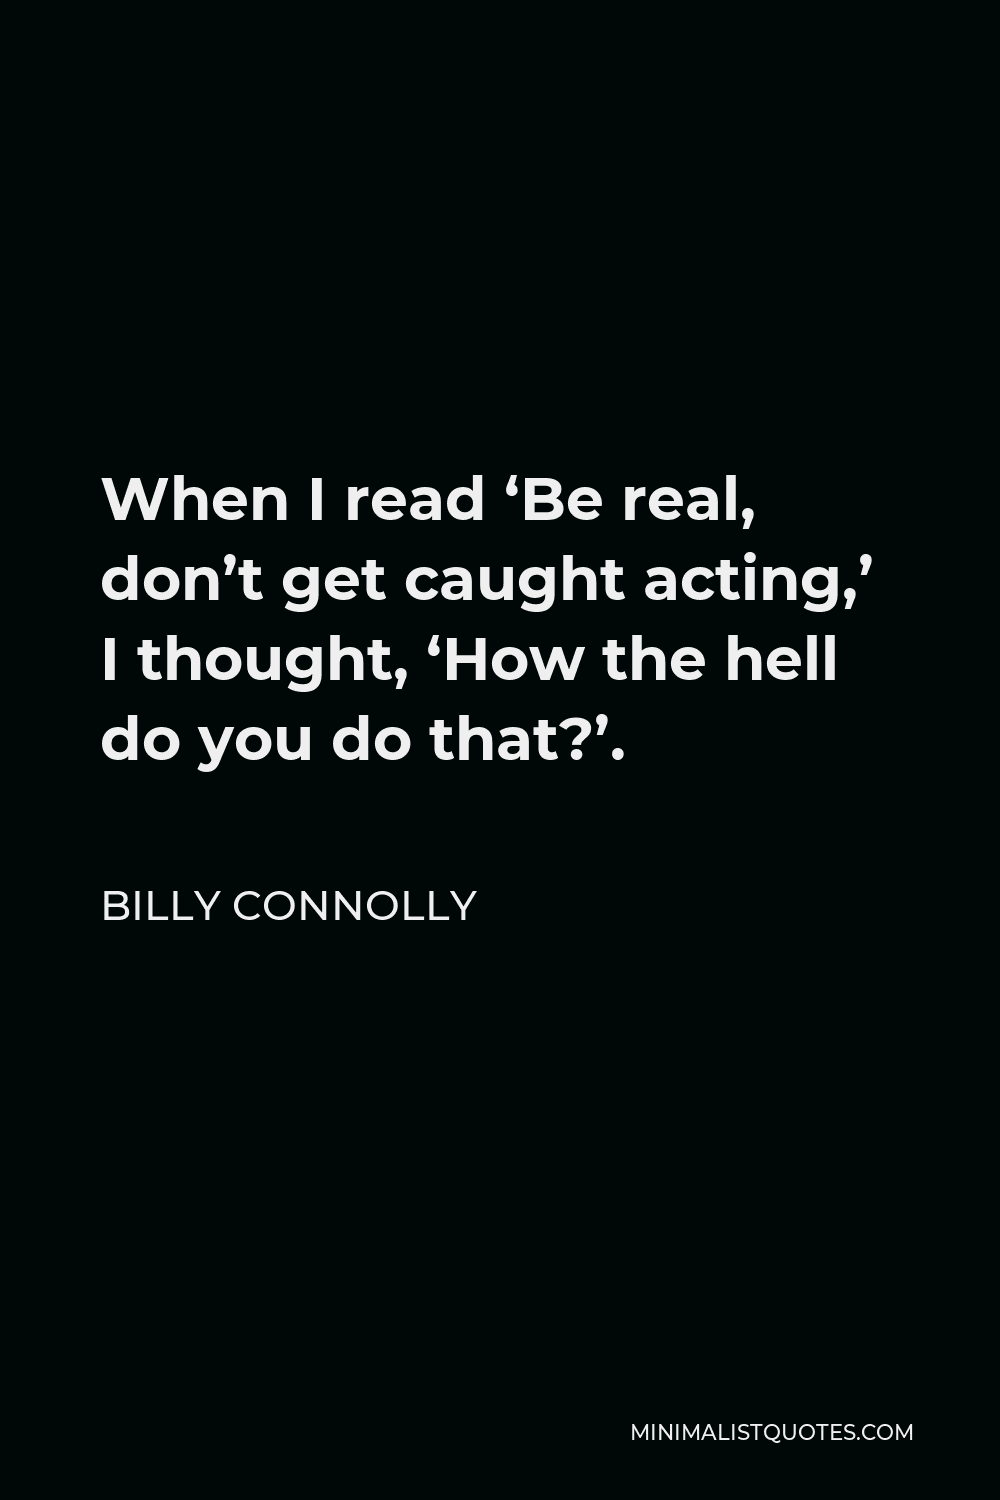 Billy Connolly Quote - When I read ‘Be real, don’t get caught acting,’ I thought, ‘How the hell do you do that?’.